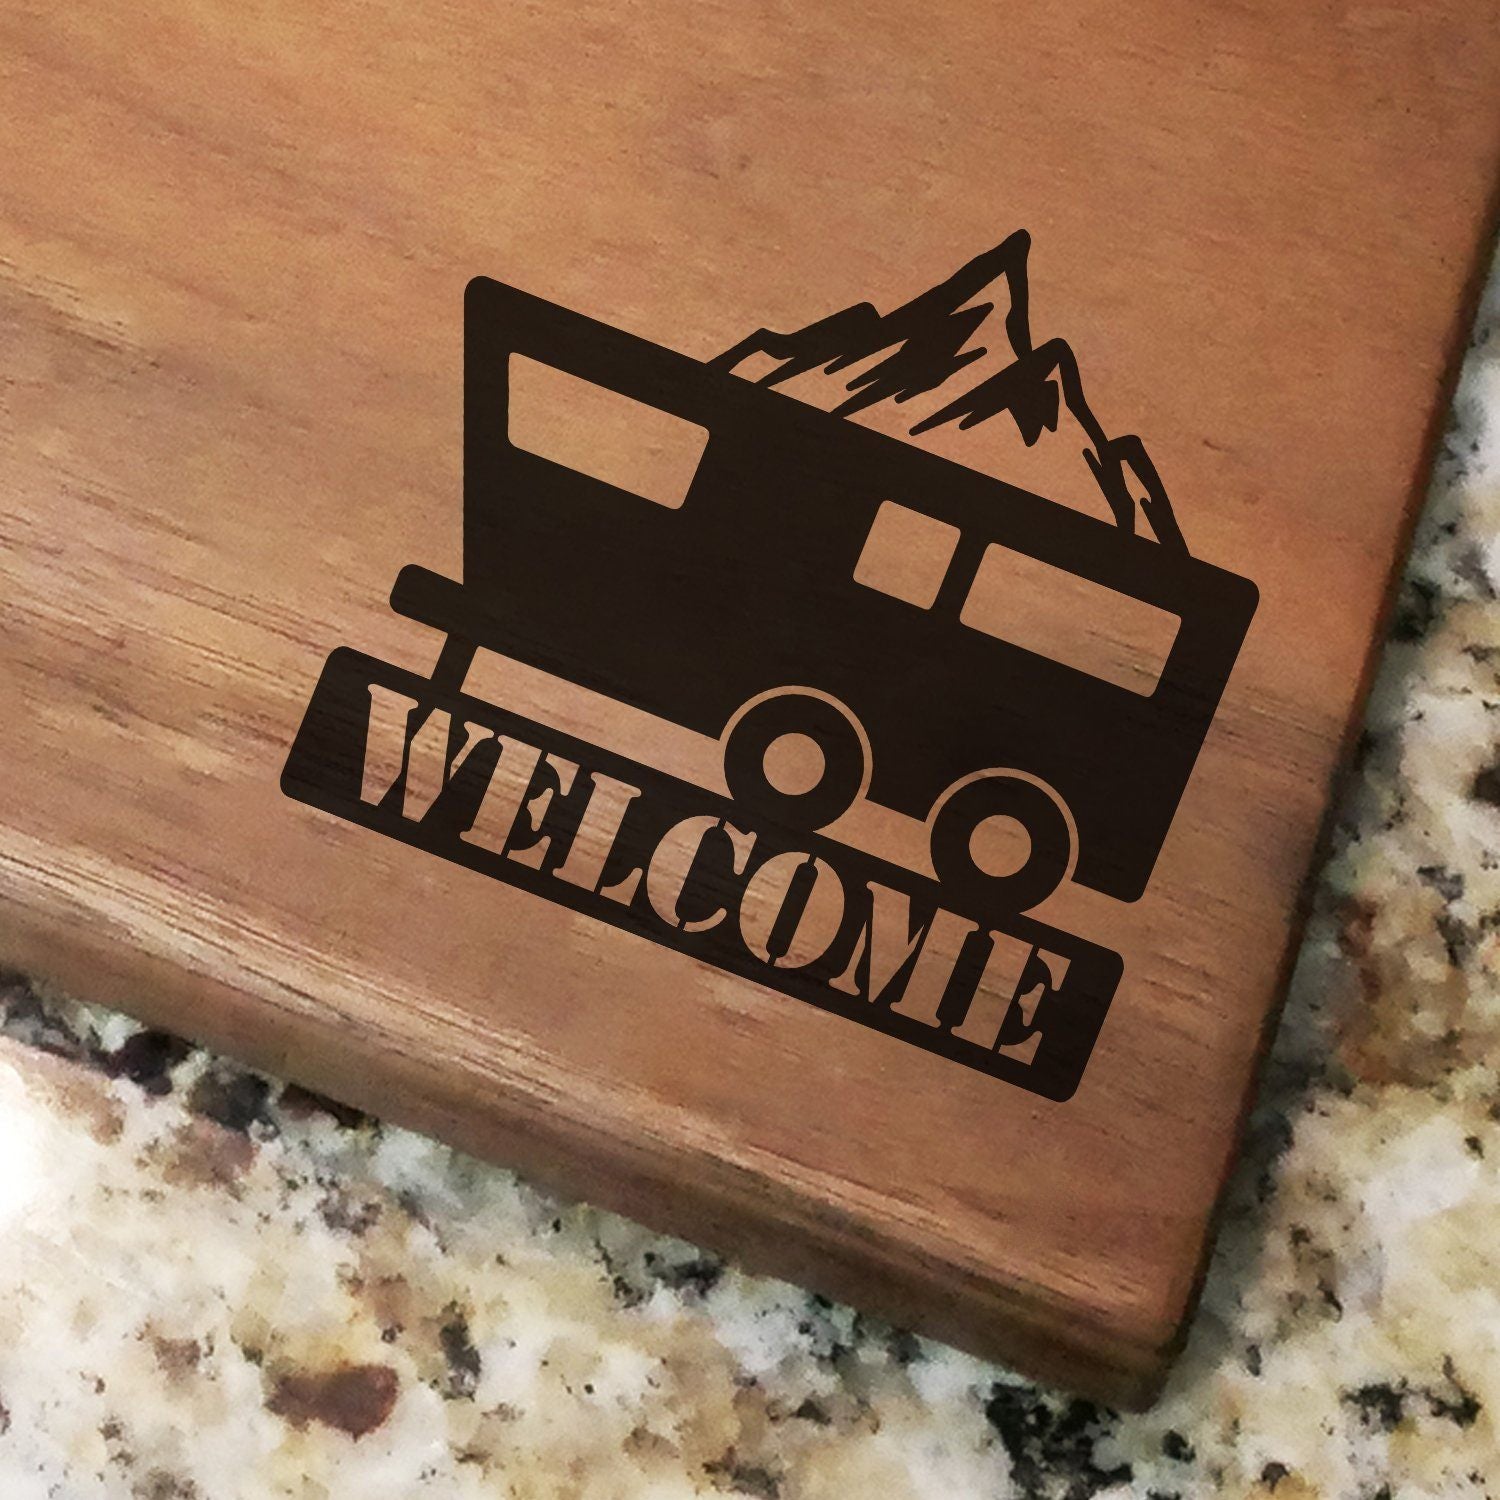 Personalized Cutting Board, Custom Cutting Board, RV Cutting Board,  Personalized RV Cutting Board, Van Life, Road Trip, Tiny Home, Dogs, 303 